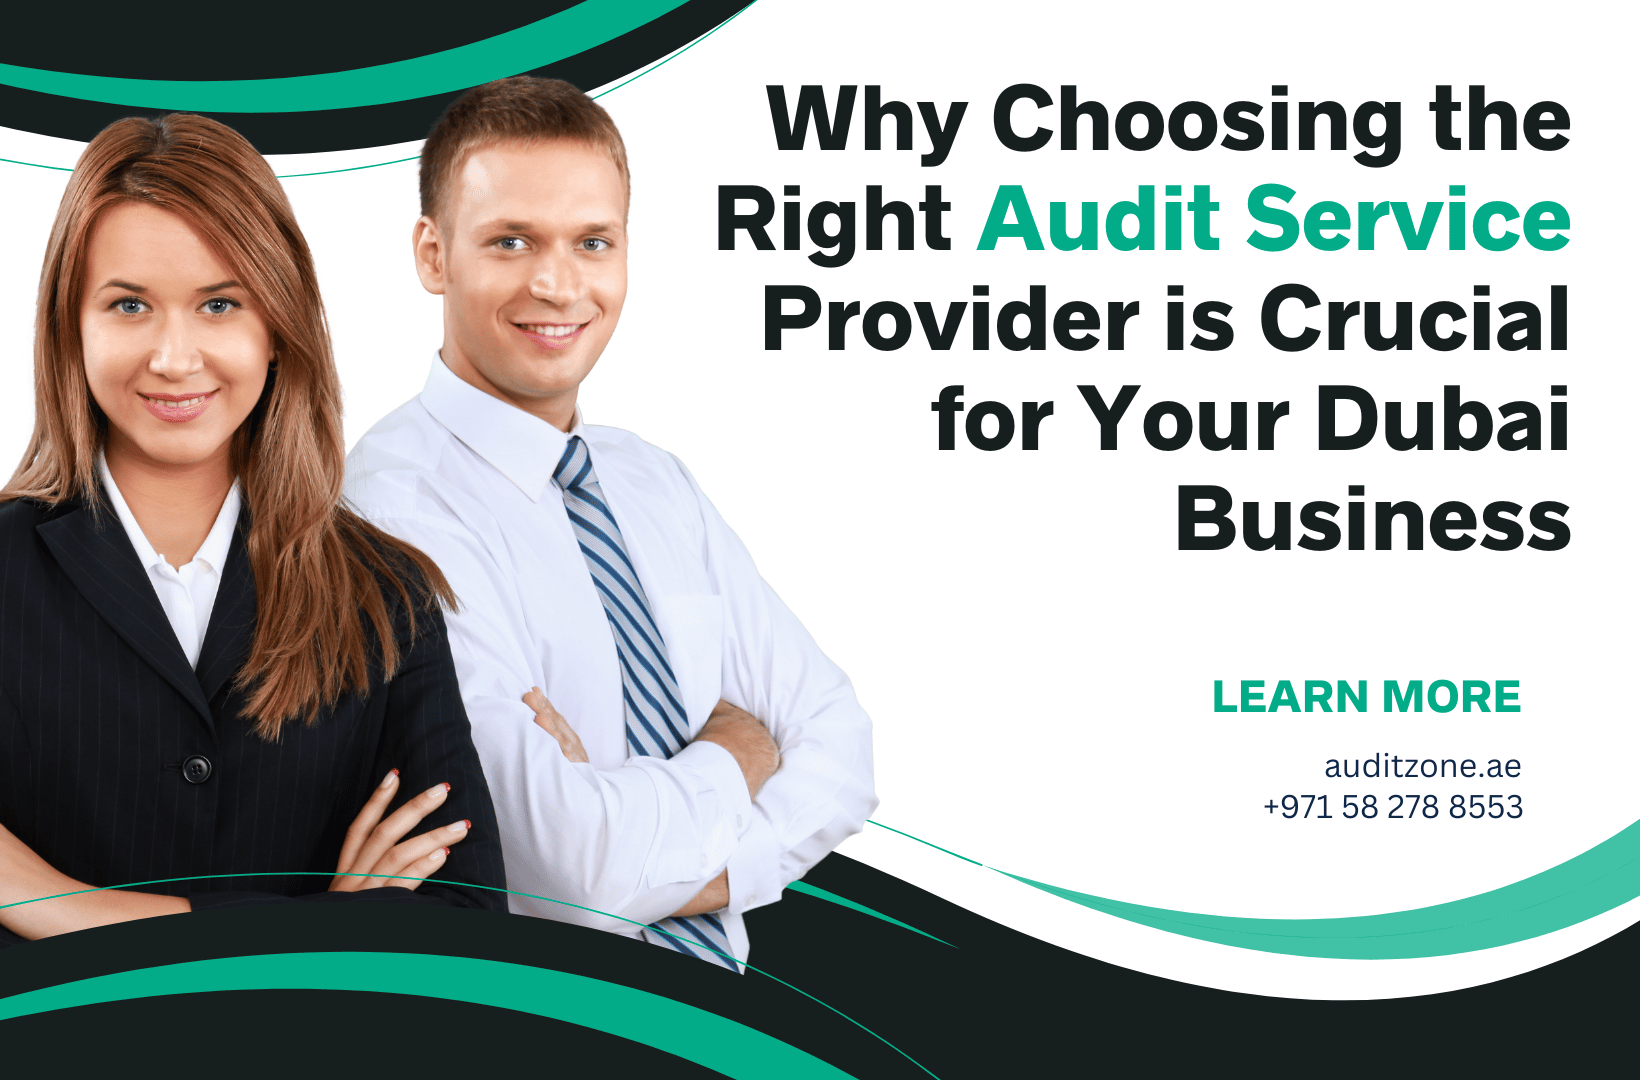 Why Choosing the Right Audit Service Provider is Crucial for Your Dubai Business